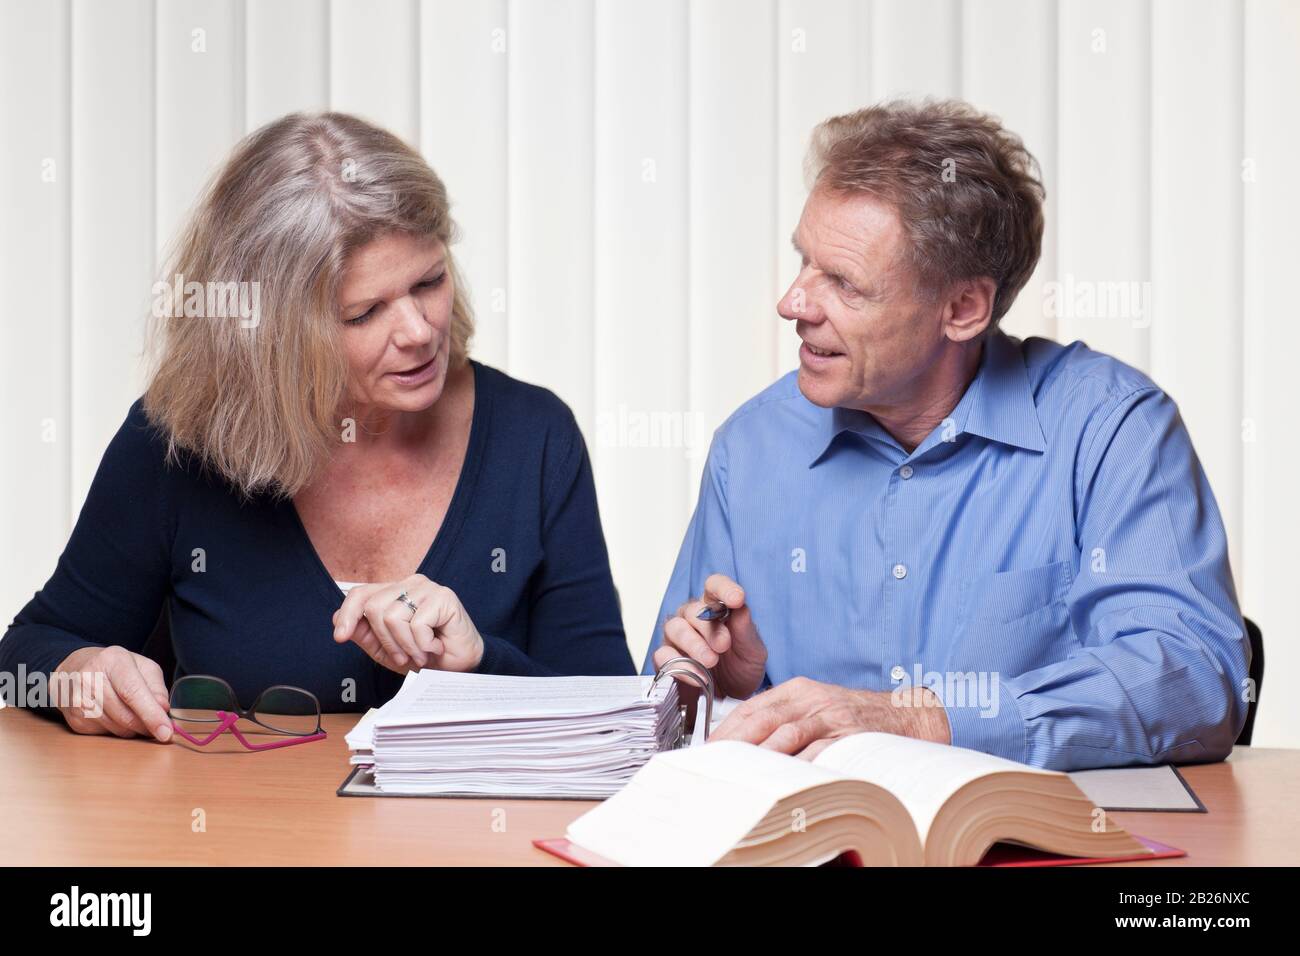 Mature woman and man discussing a project.. Could be lawyer, consultant or accoutant Stock Photo